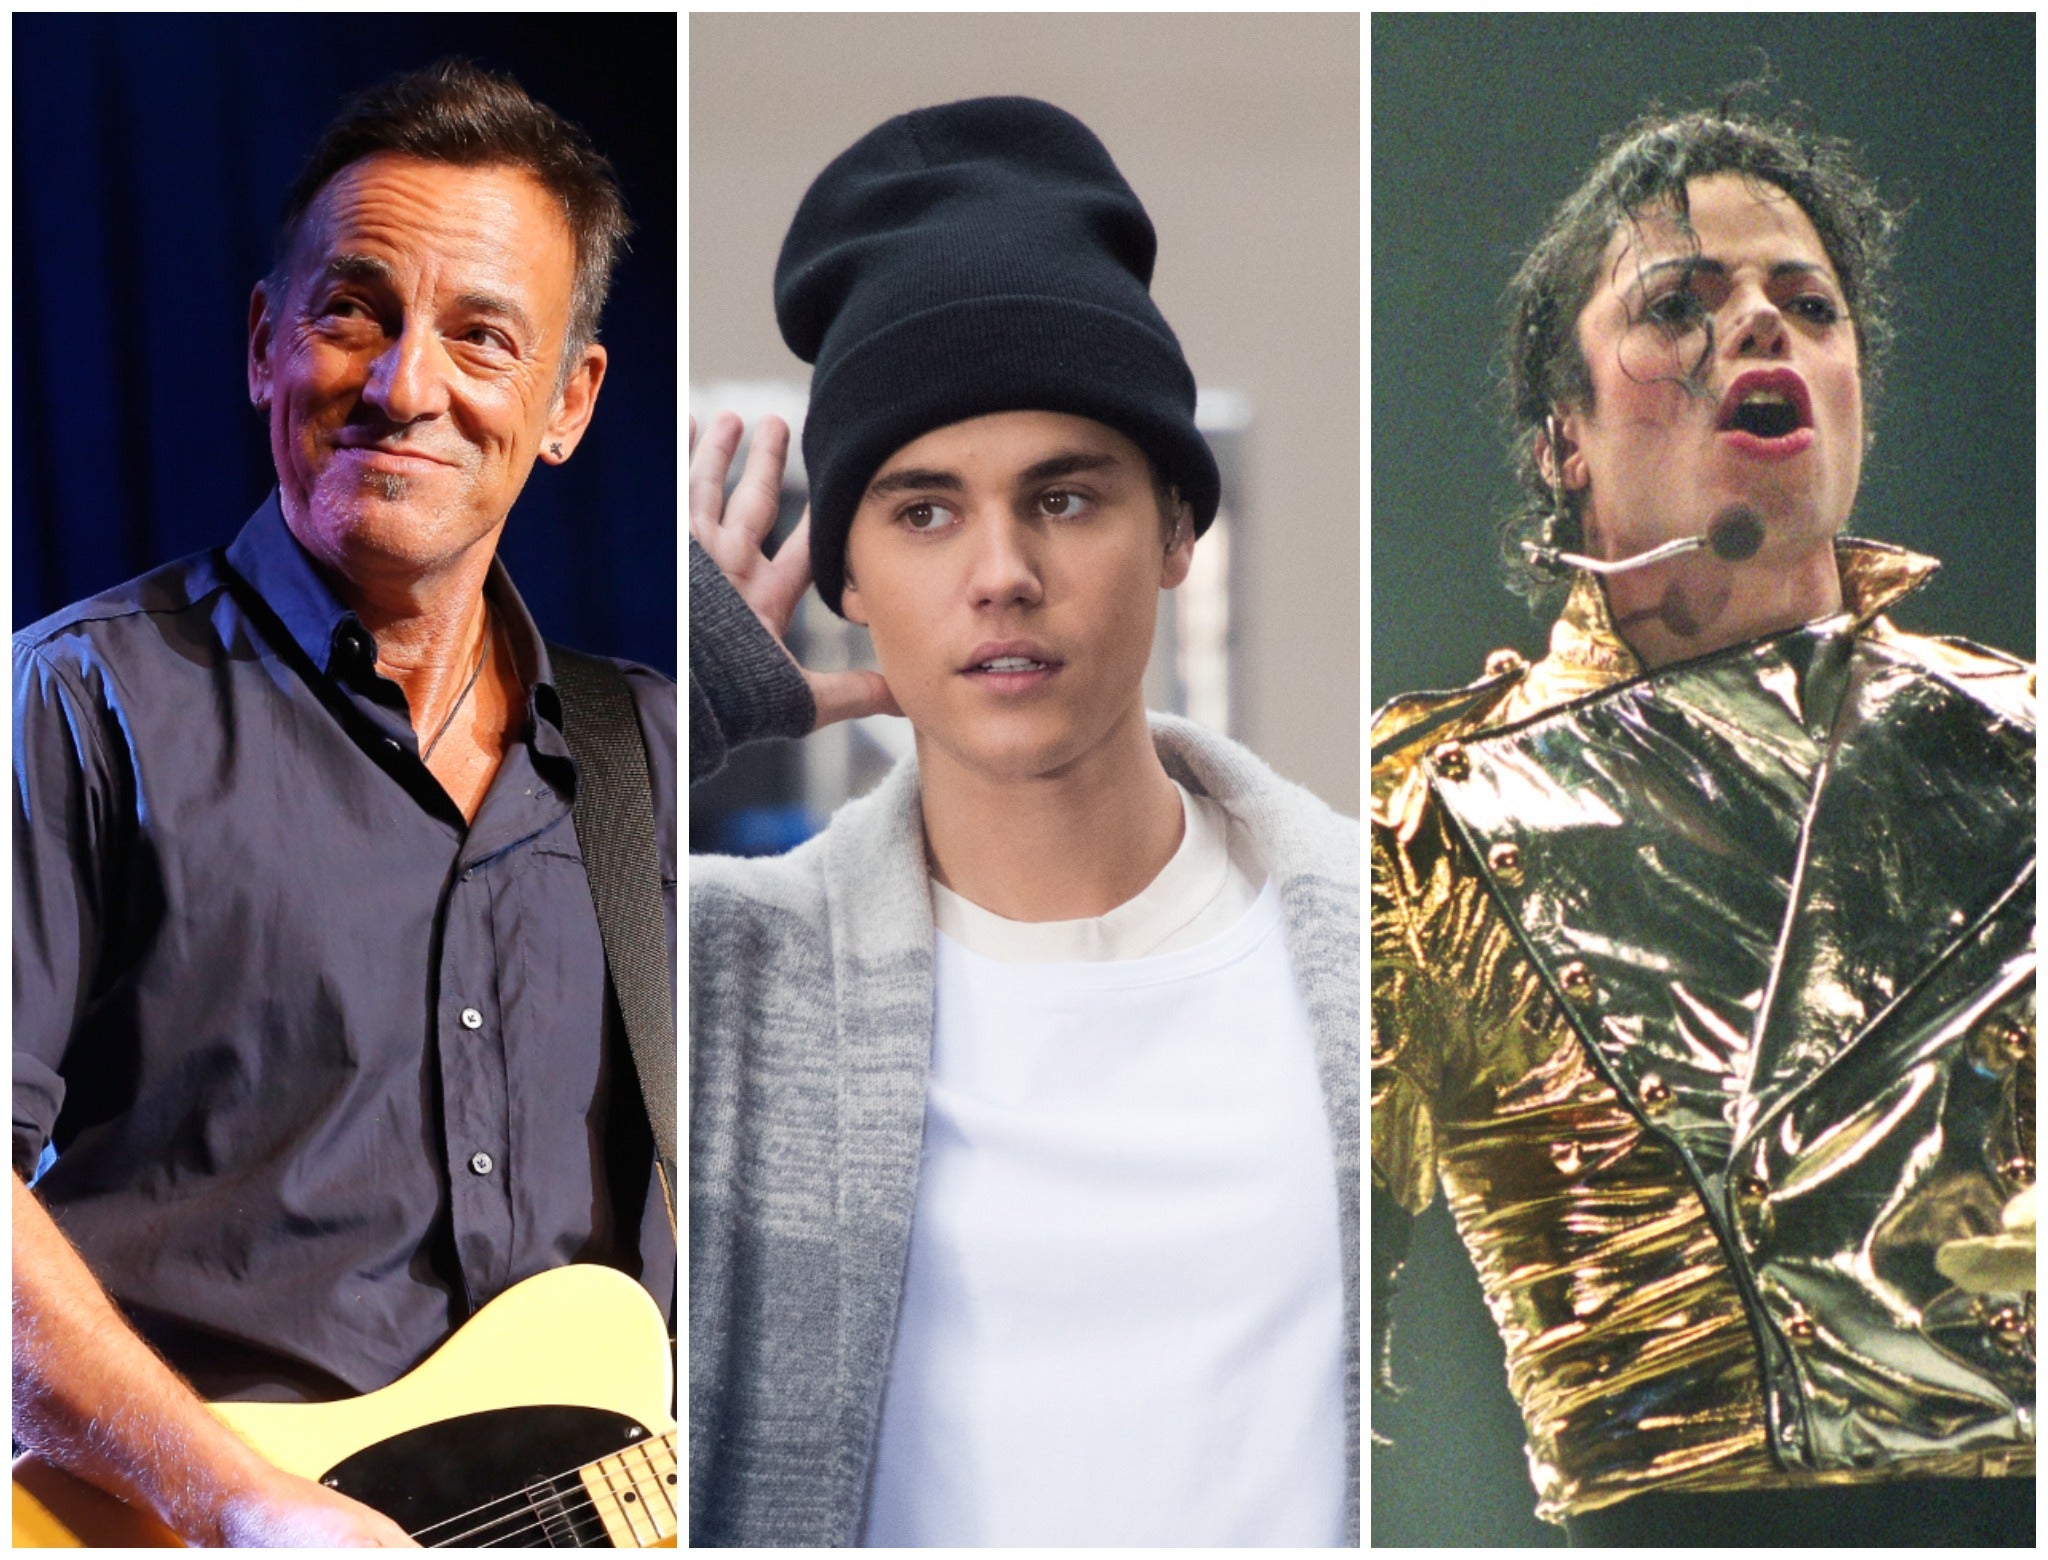 L-R: Bruce Springsteen, Justin Bieber and Michael Jackson